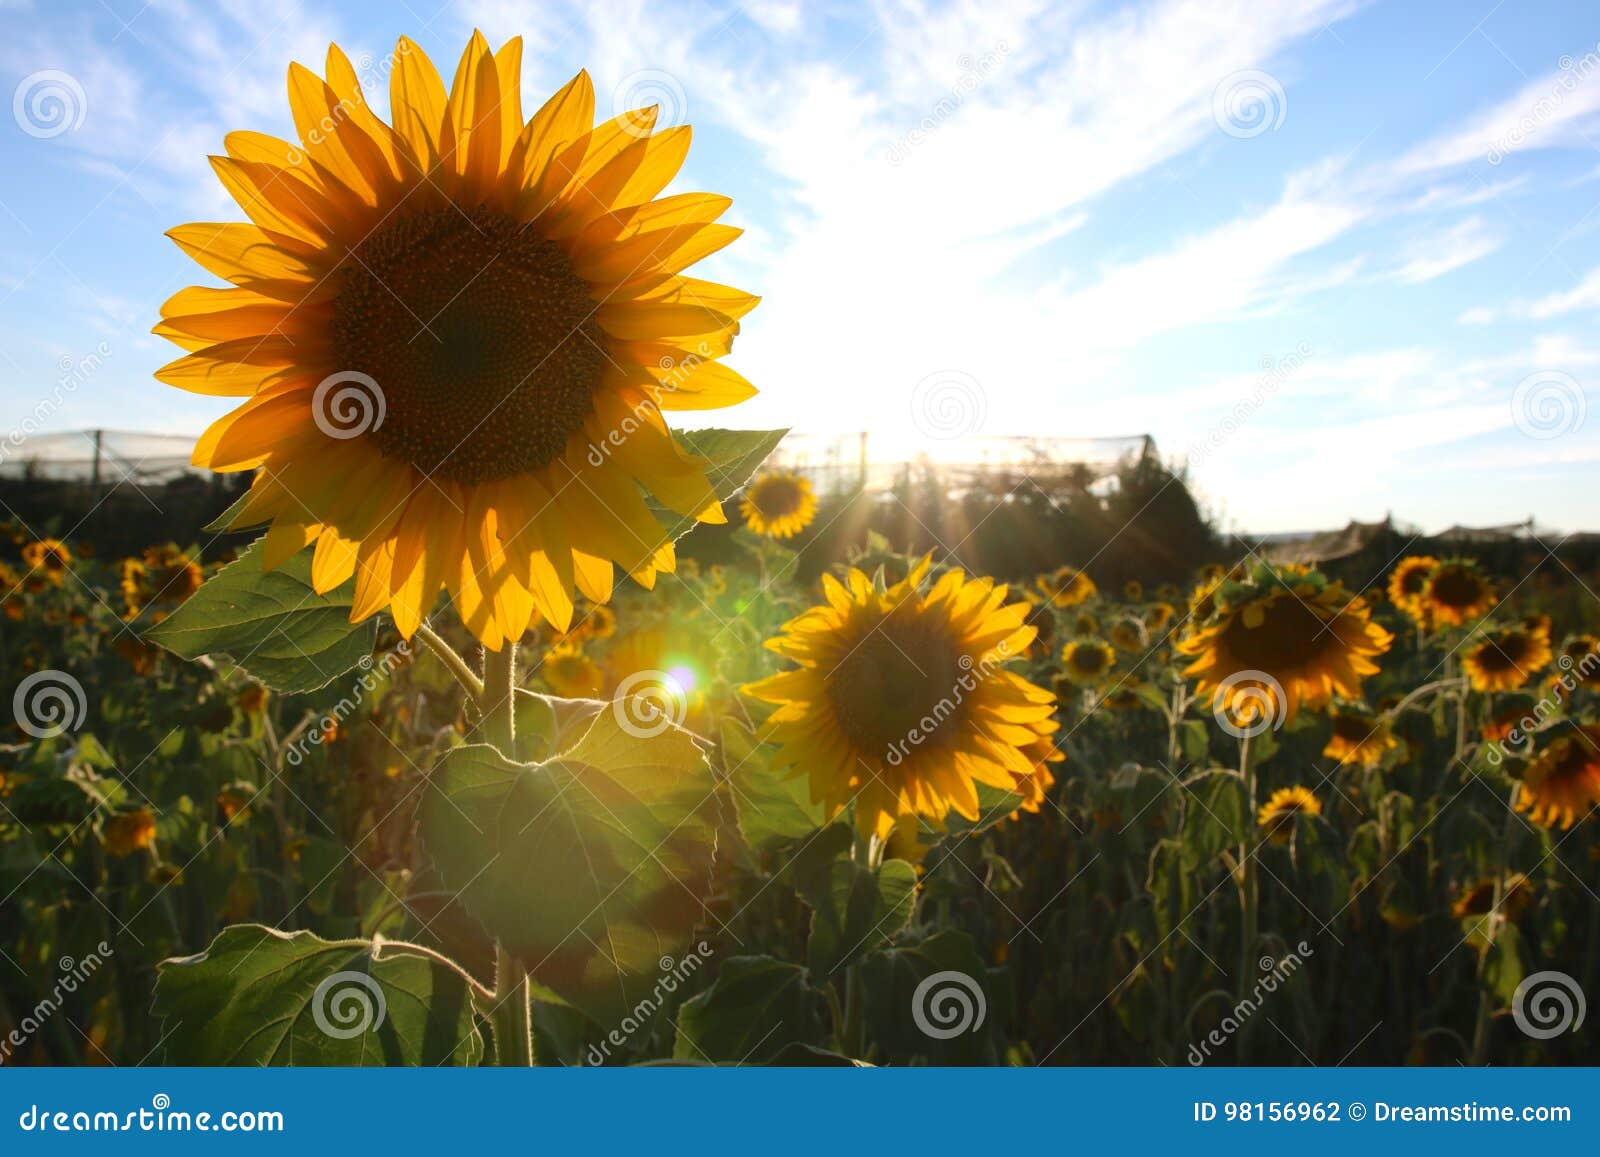 sunflower field in valensole, provence